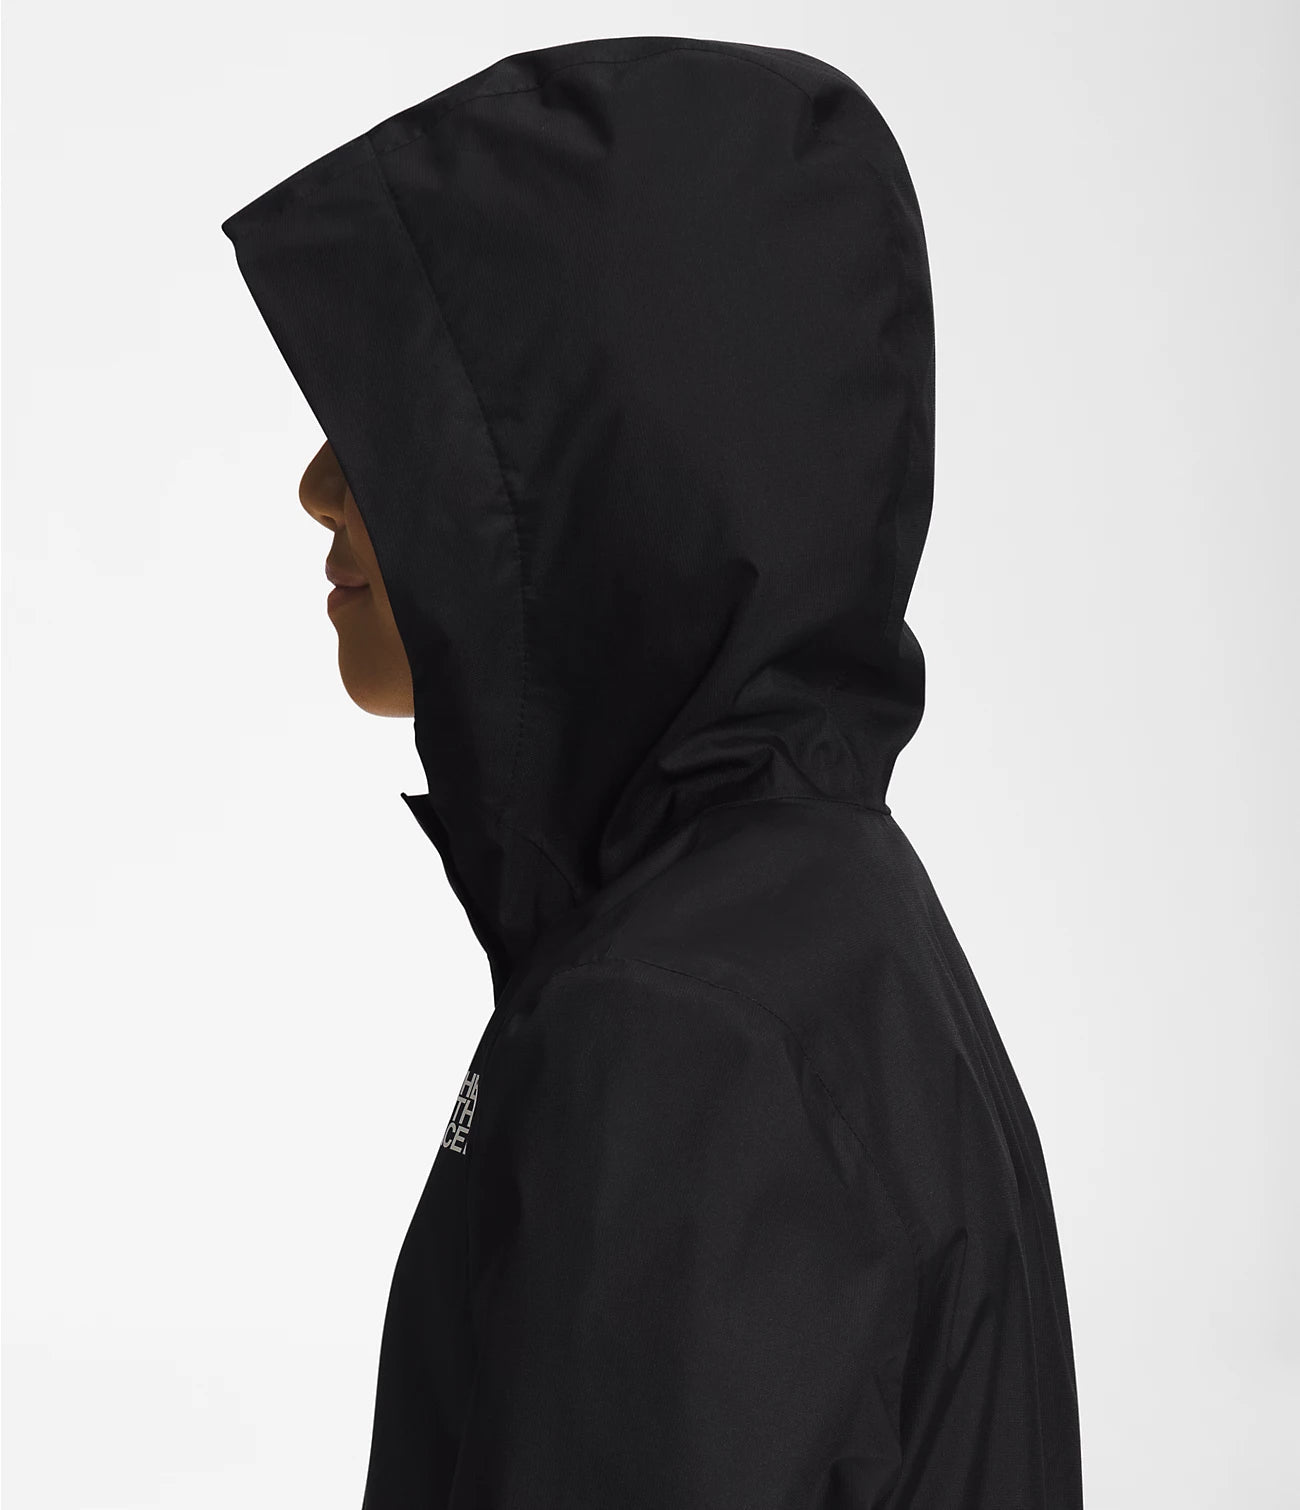 Side view of a girl wearing Black The North Face Girls' Warm Storm Jacket with Hoodie on - Mountain Kids Outfitters: Stylish and Weather-Ready Outerwear